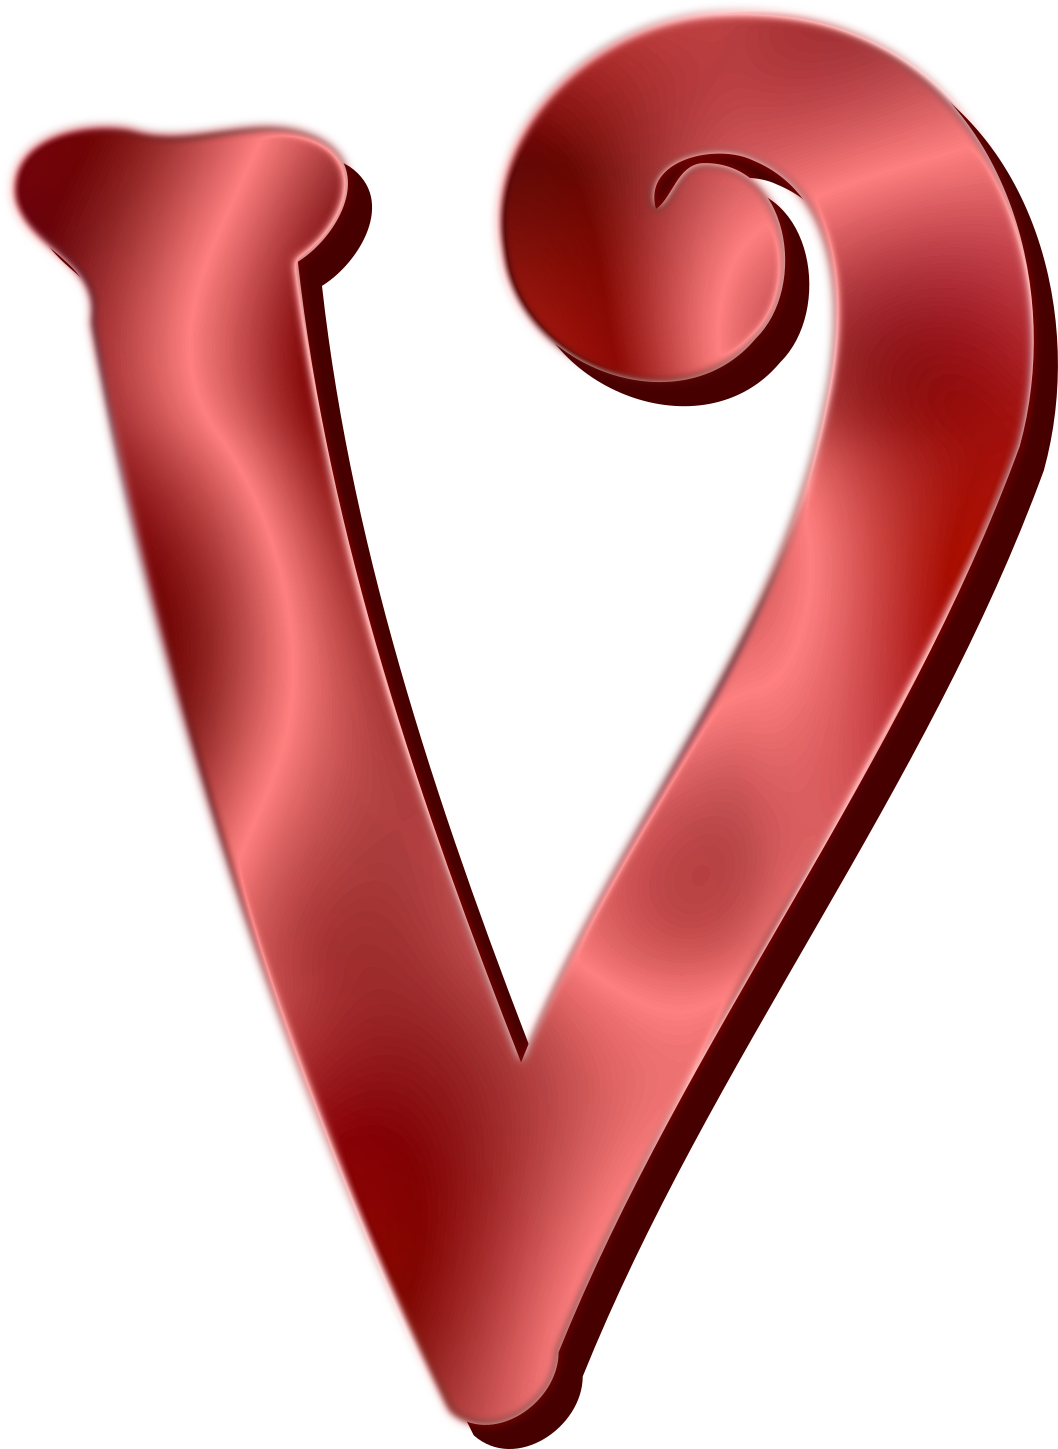 Download Photos Letter V Free Clipart HD HQ PNG Image